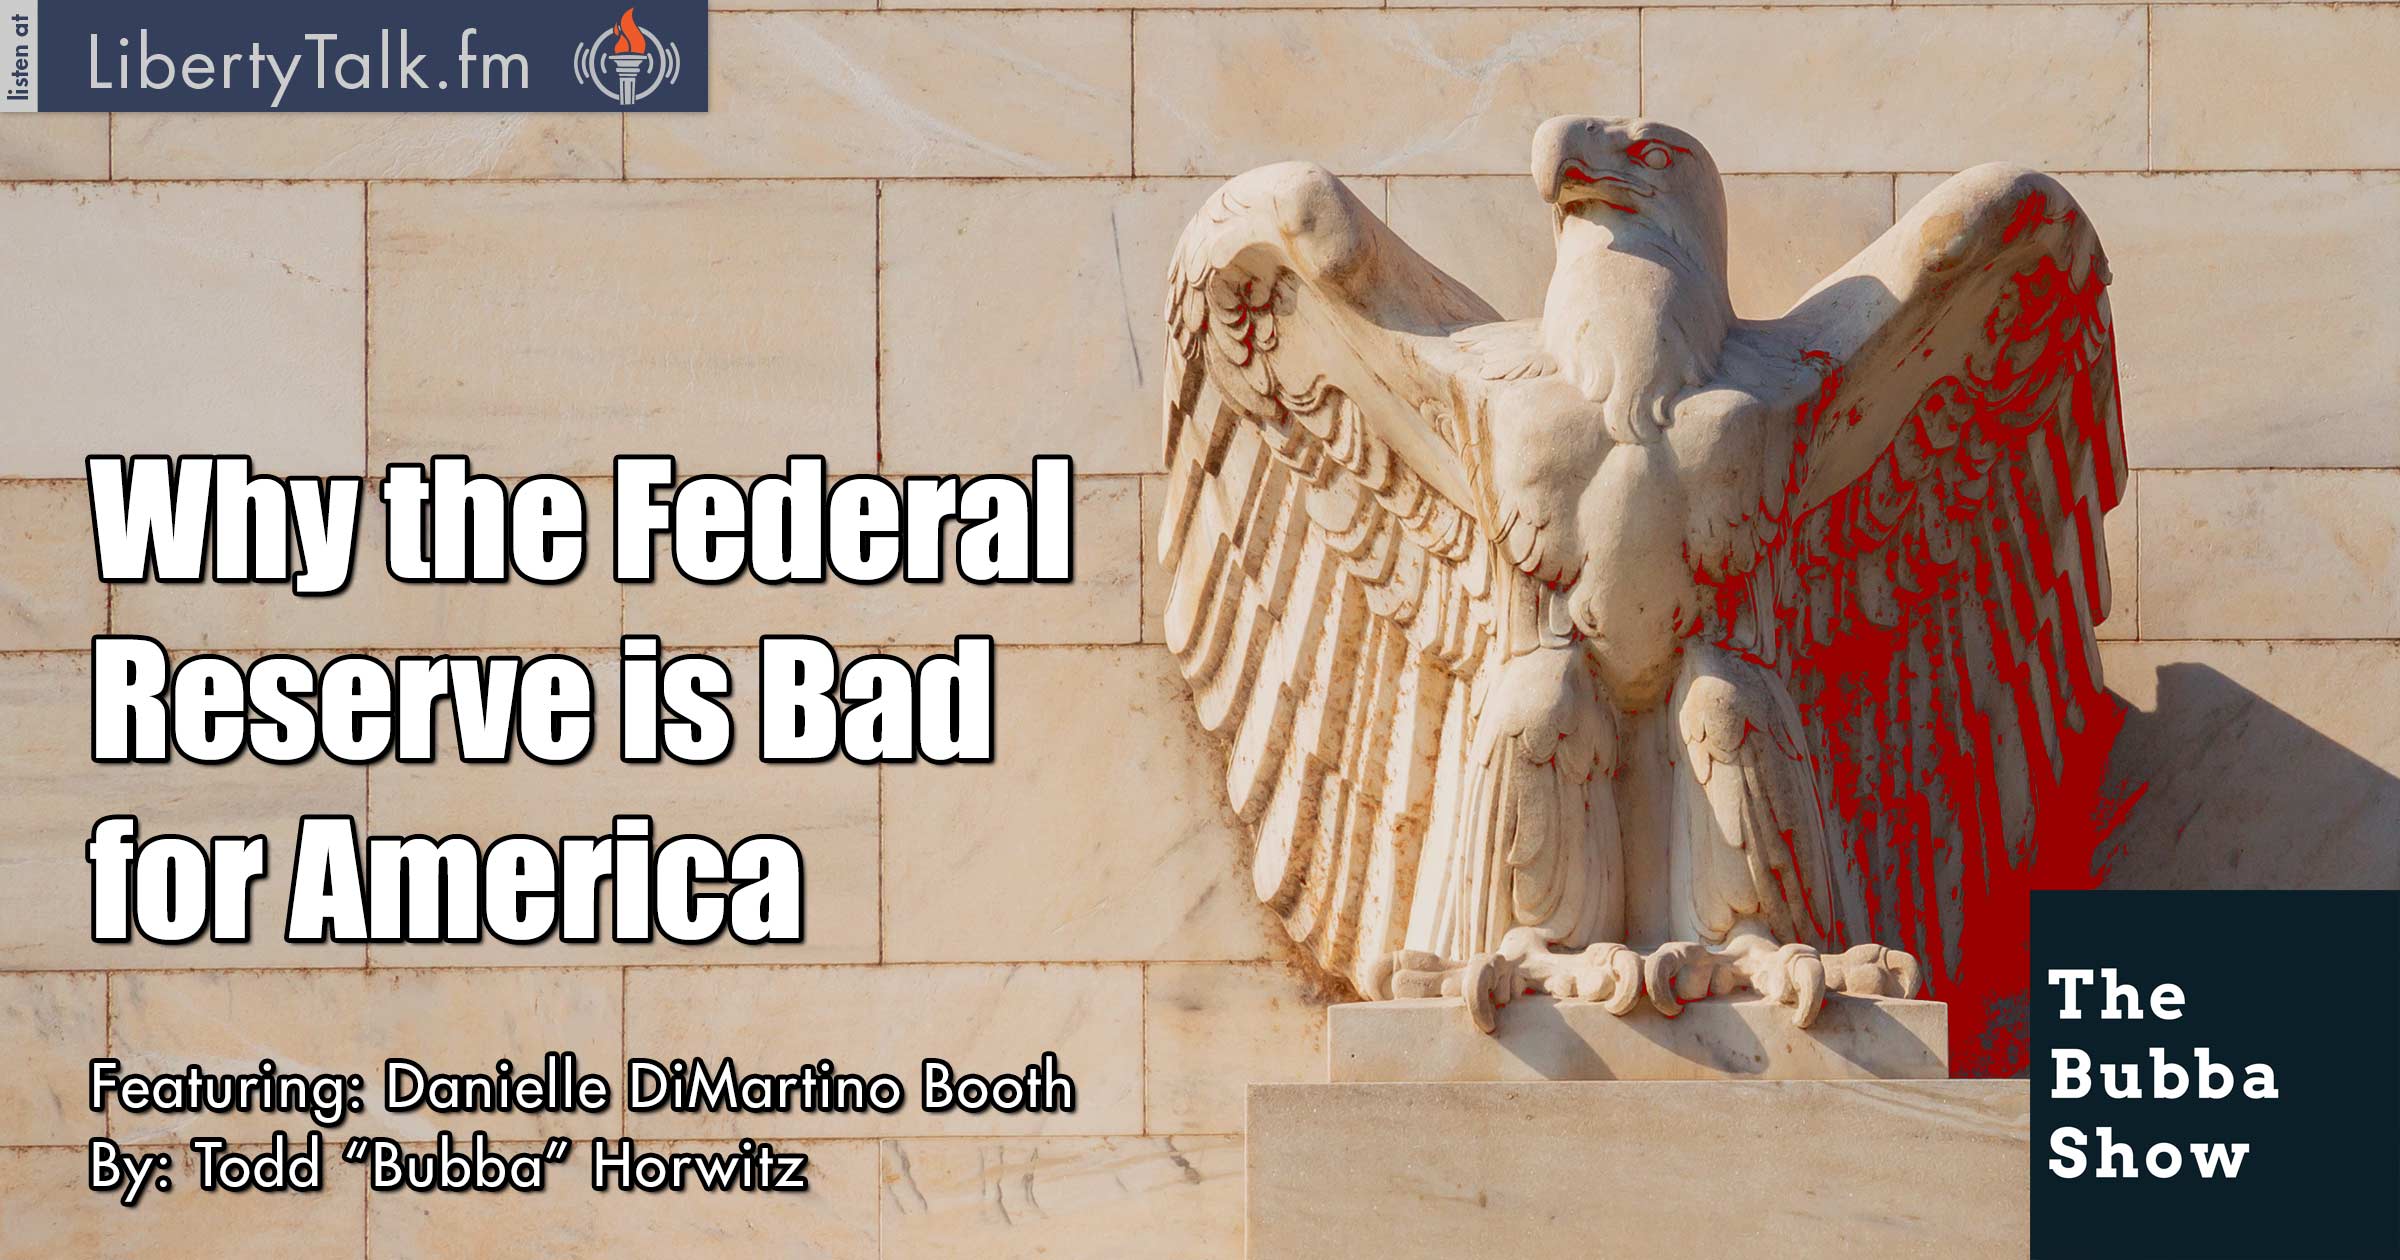 An Insider's Take on Why the Federal Reserve is Bad for America - The Bubba Show